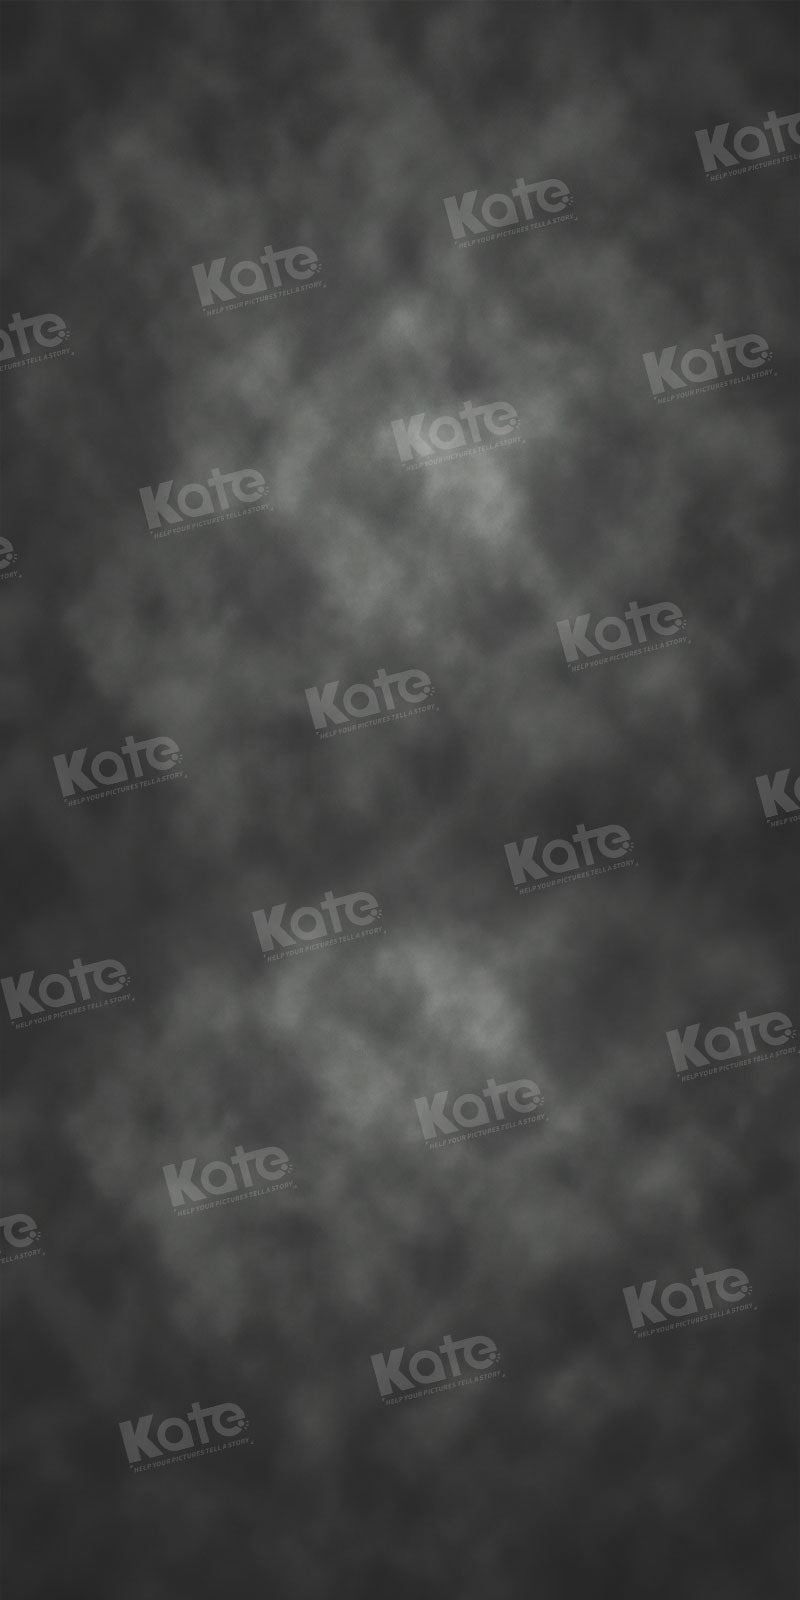 Kate Sweep Abstract Backdrop Dark Grey for Photography